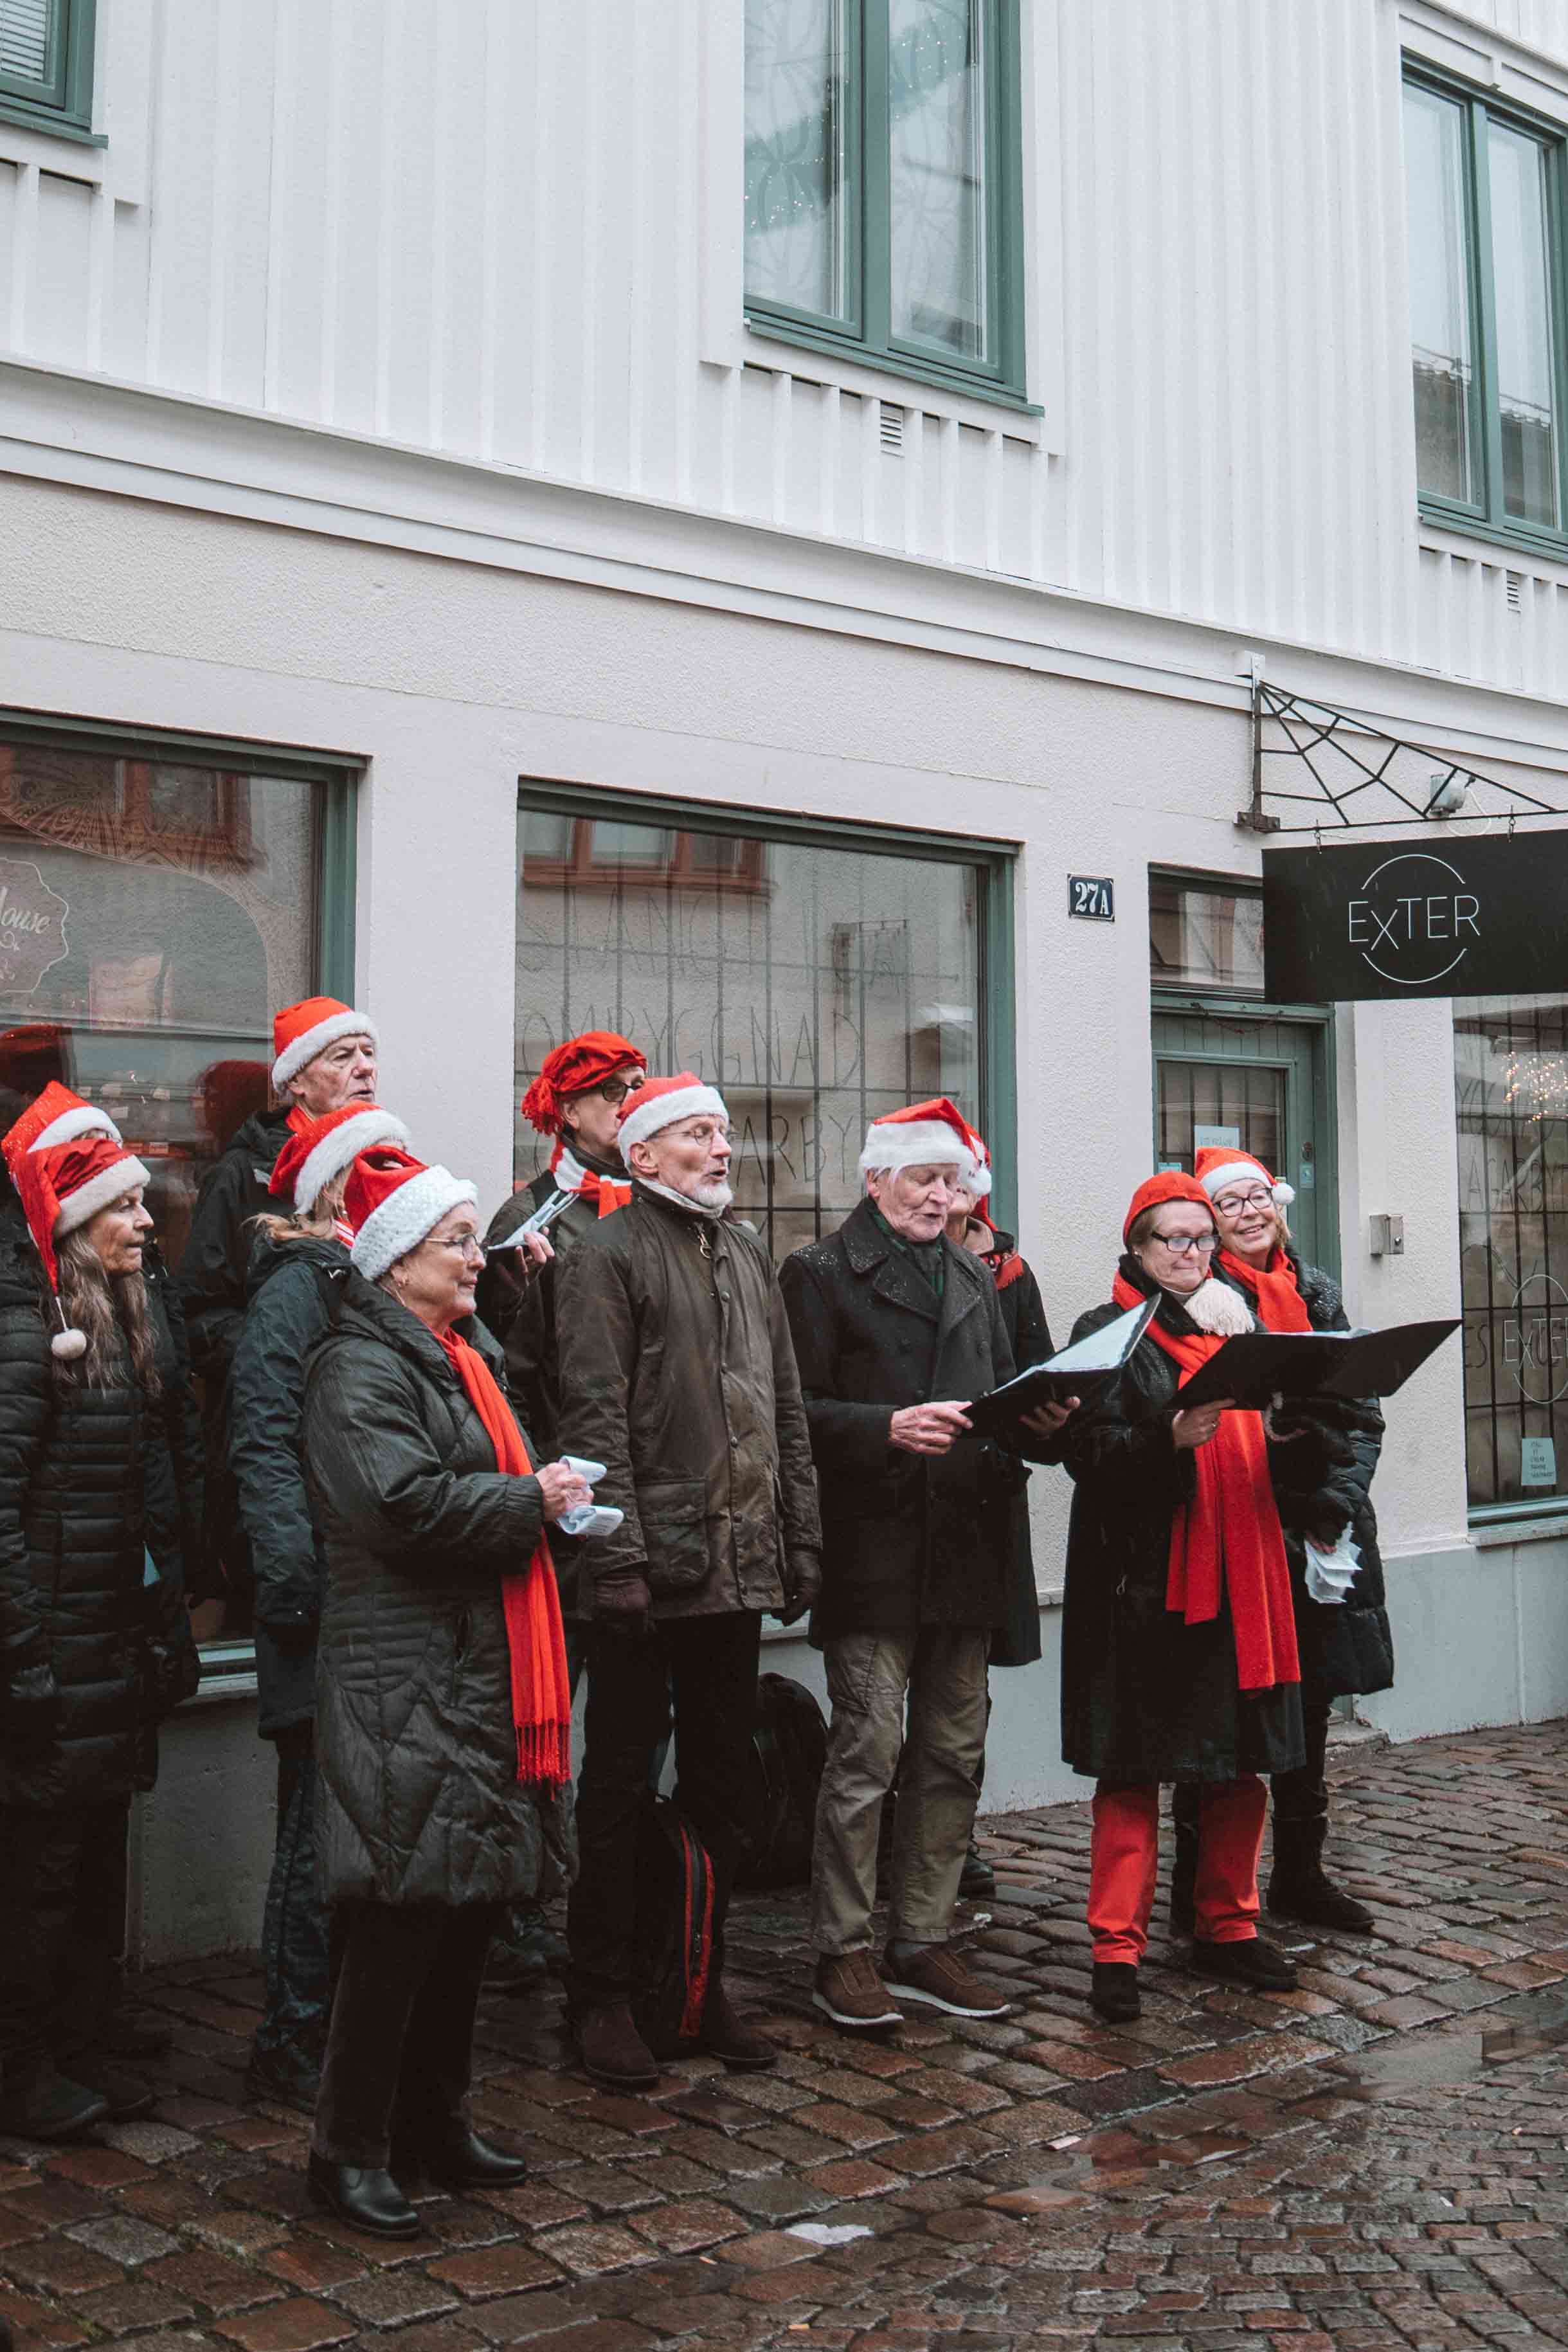 choir singers at christmas event in gothenburg